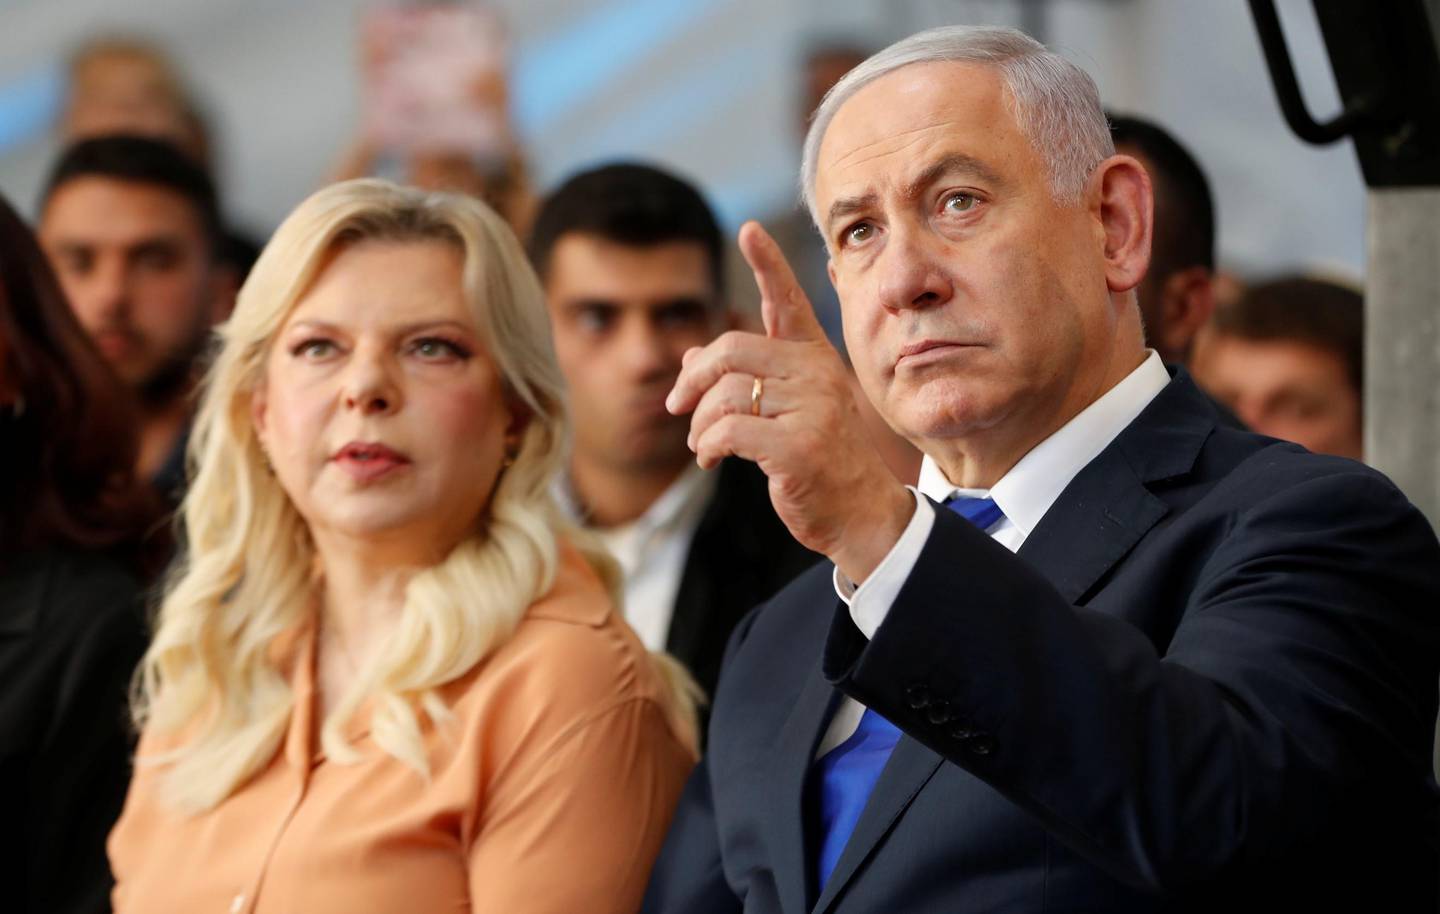 Israeli Prime Minister Benjamin Netanyahu and his wife, Sara attend a state memorial ceremony at the Tomb of the Patriarchs, a shrine holy to Jews and Muslims, in Hebron in the Israeli-occupied West Bank September 4, 2019. REUTERS/Ronen Zvulun